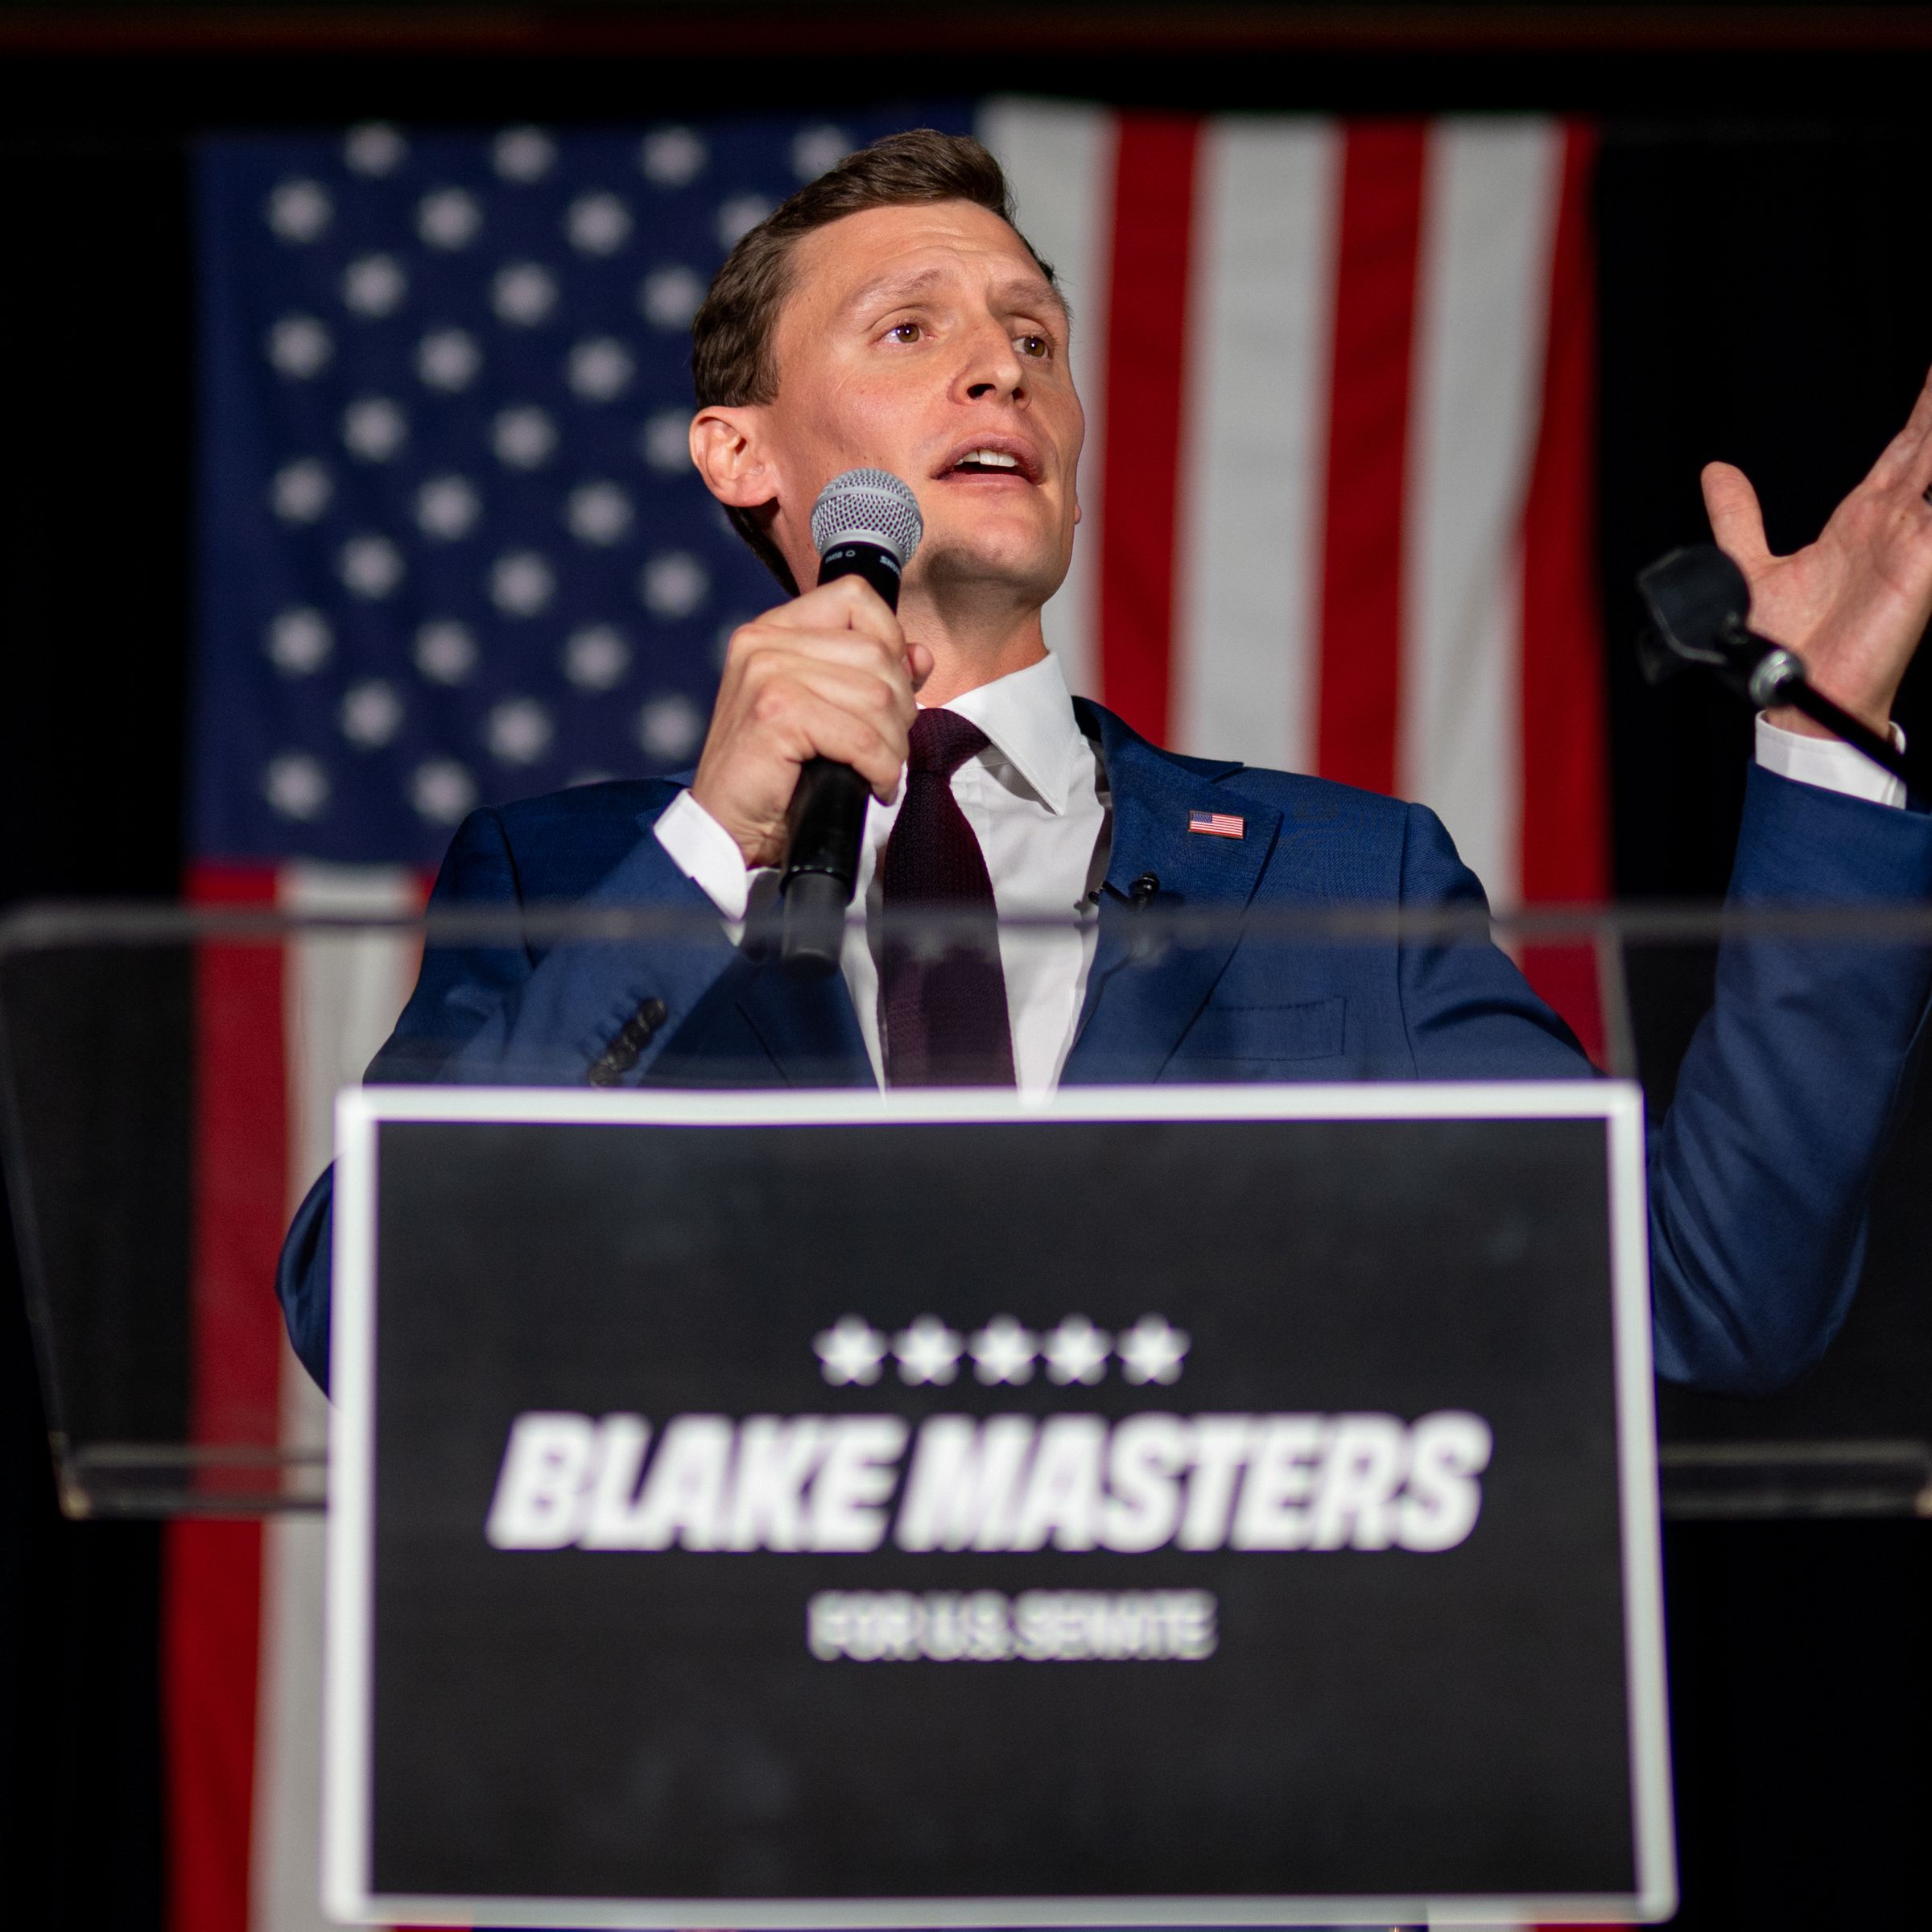 Candidate For Senate Blake Masters Holds Primary Night Event In Chandler, AZ